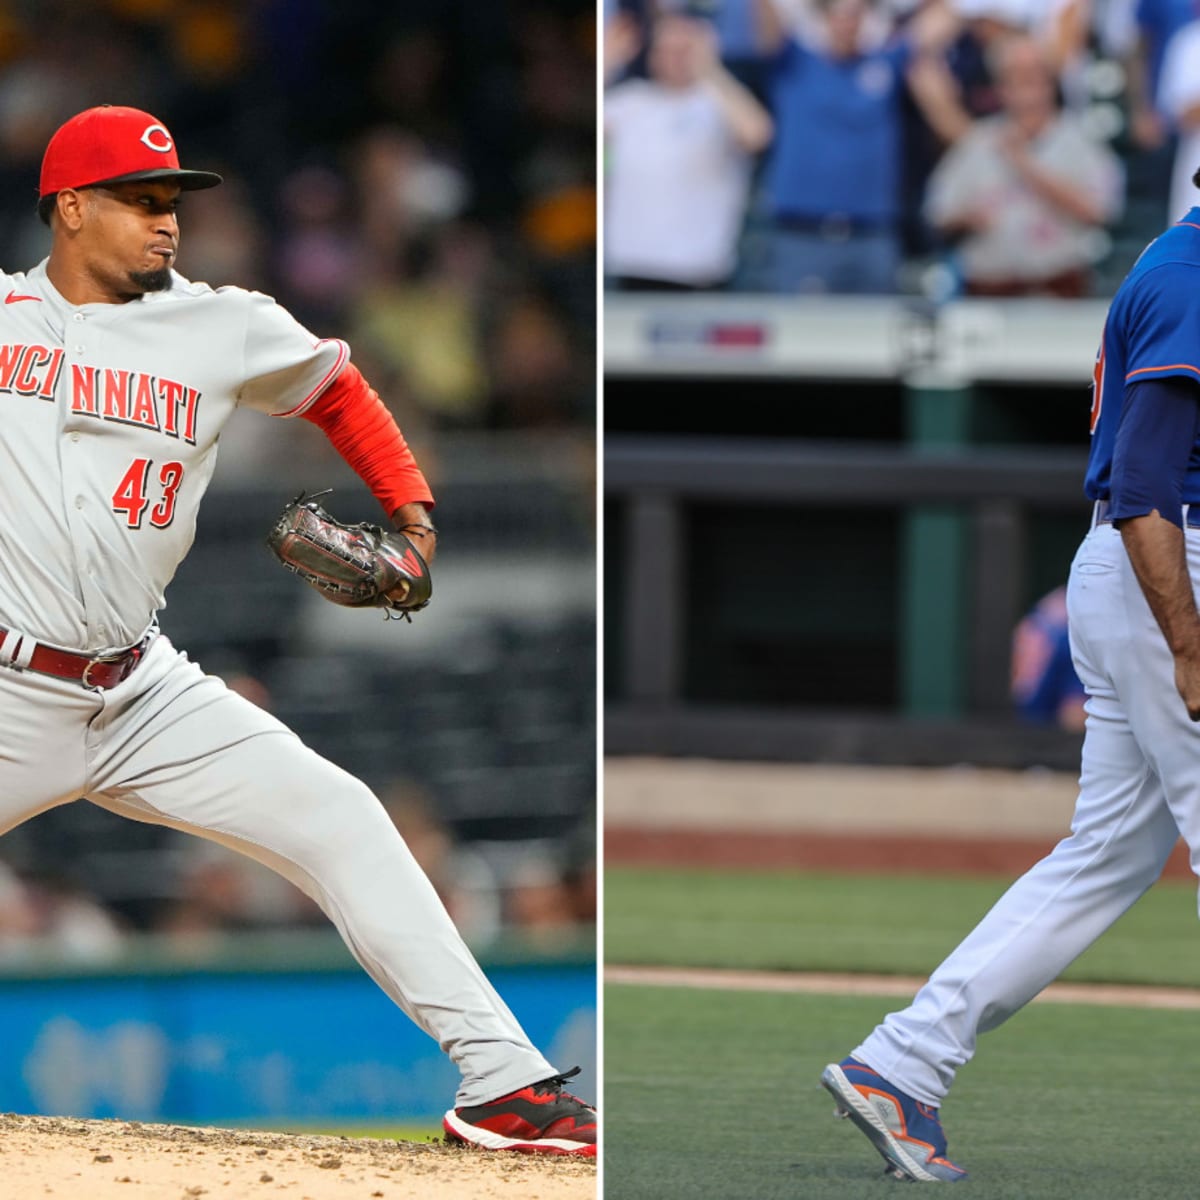 Cincinnati Reds - Alexis Díaz and his brother, Mets closer Edwin Díaz,  exchanged lineup cards before Tuesday's Reds-Mets game. Fifty members of  their family made the trip from Puerto Rico to New